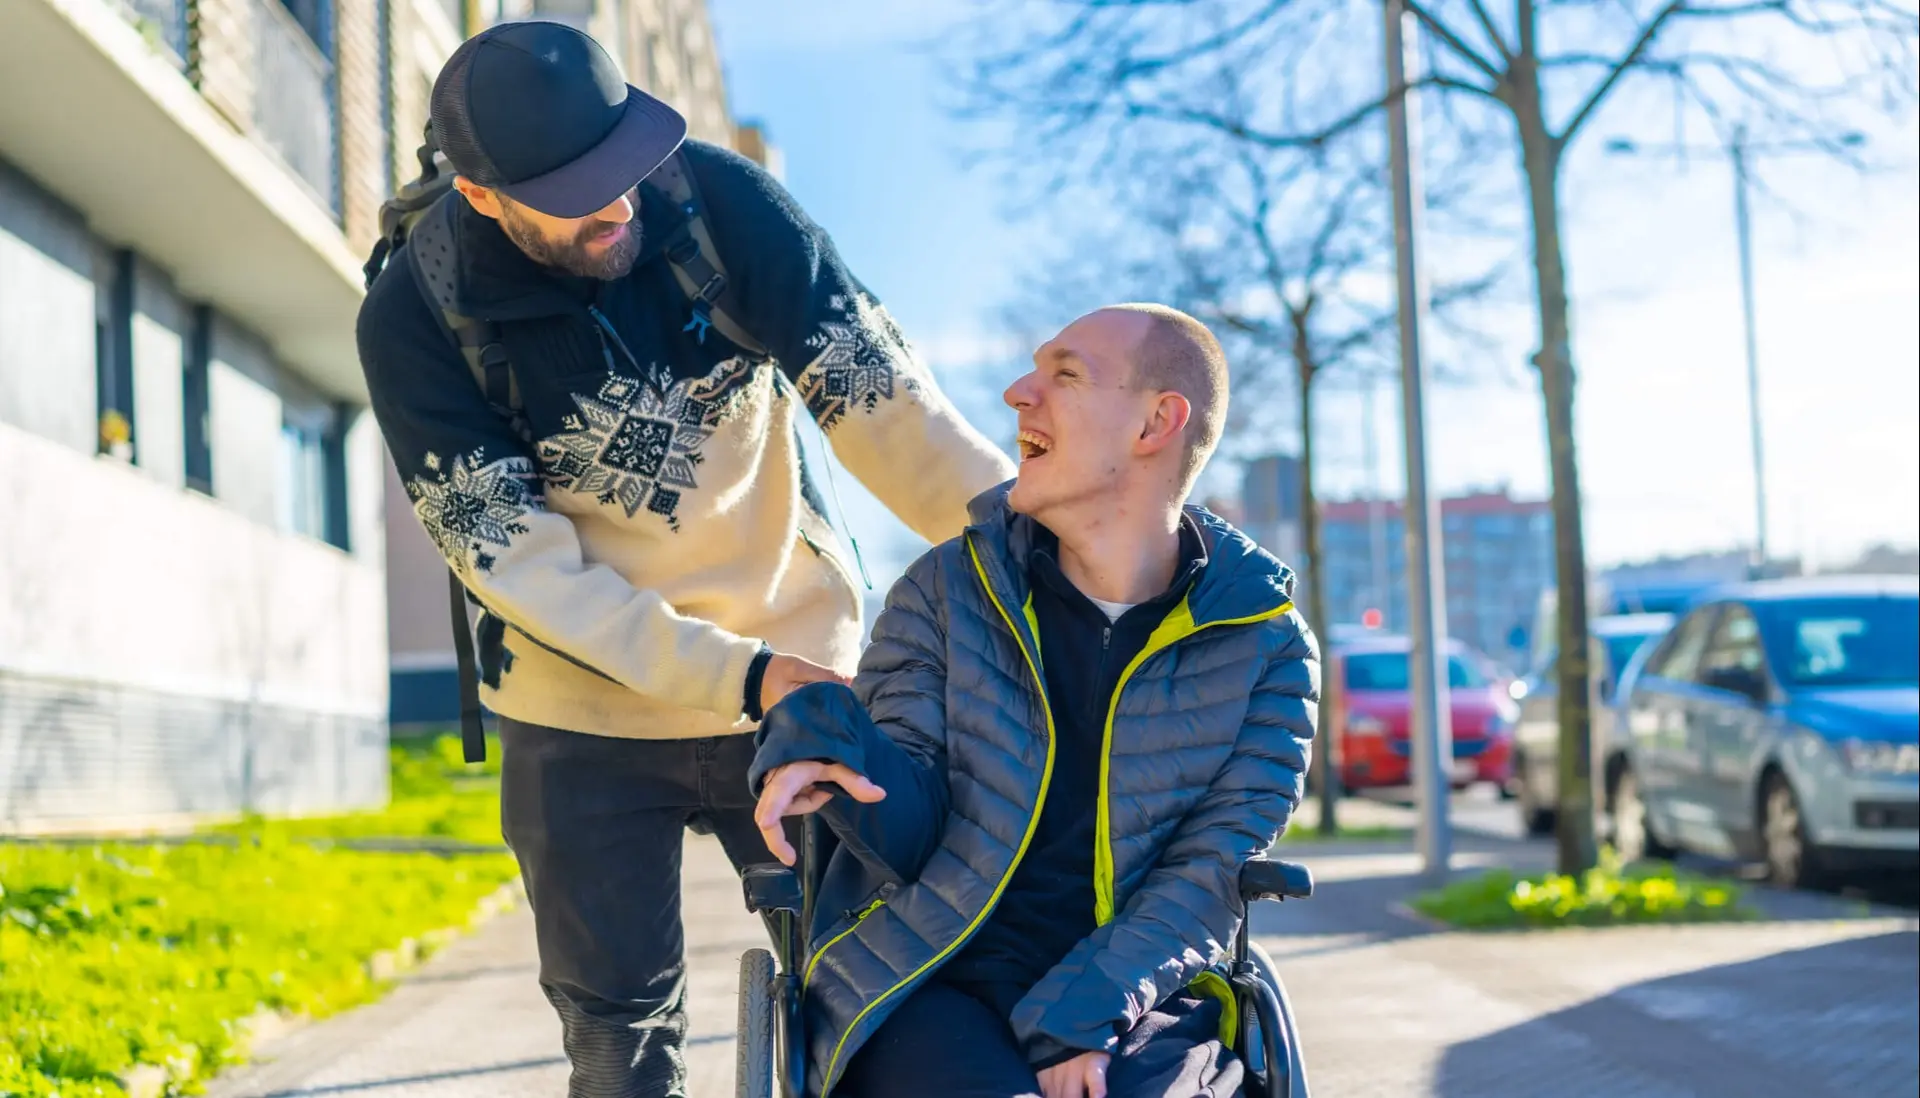 a man in a wheelchair laughs at something his friend is saying to him while they're out on a sunny day